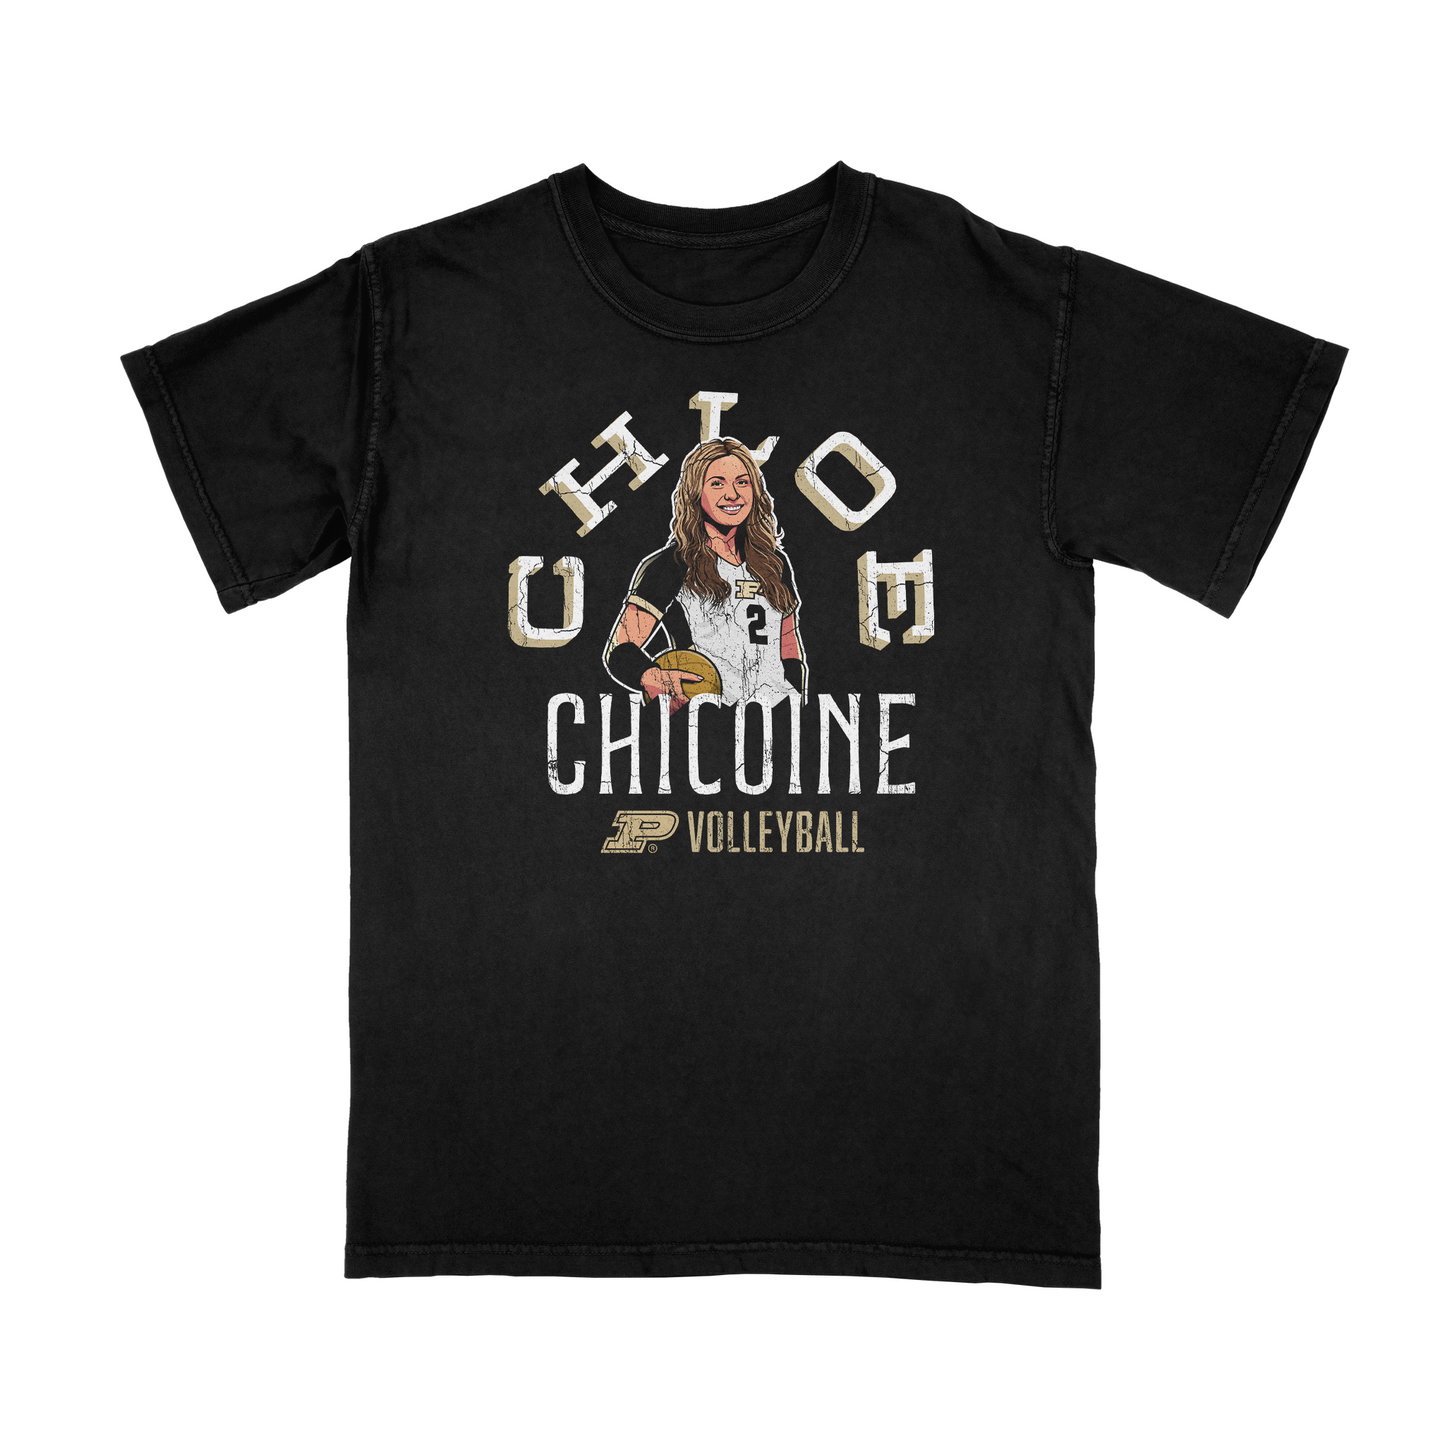 LIMITED RELEASE: Chloe Chicoine Tee